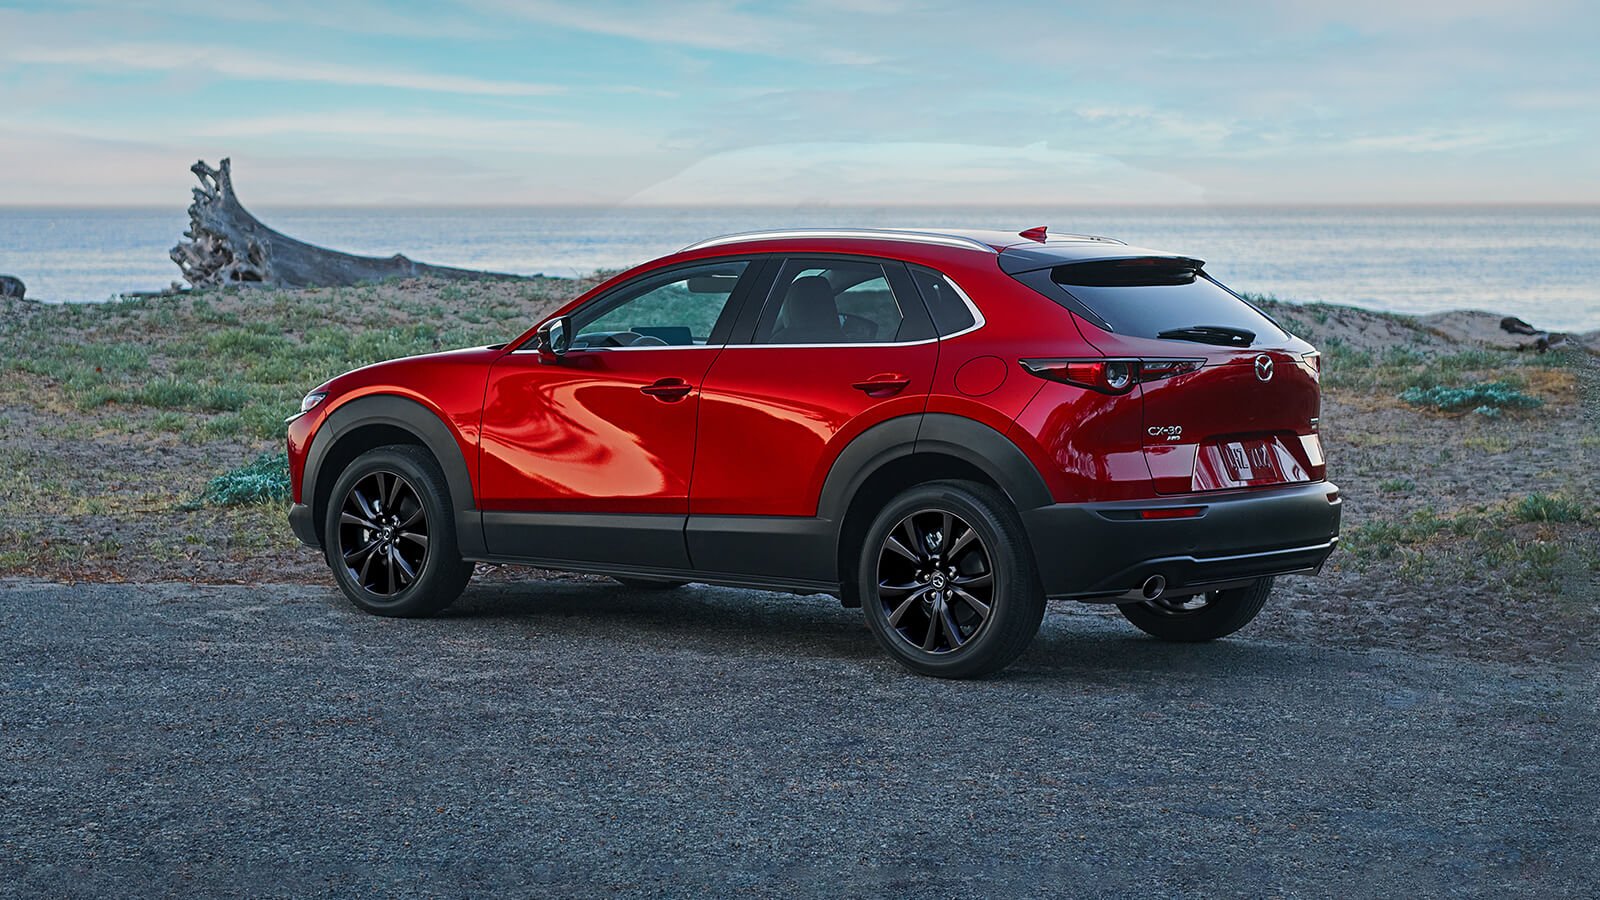 Mazda CX-30 updated - New 10.25-inch screen, remote start, 2 new colours 